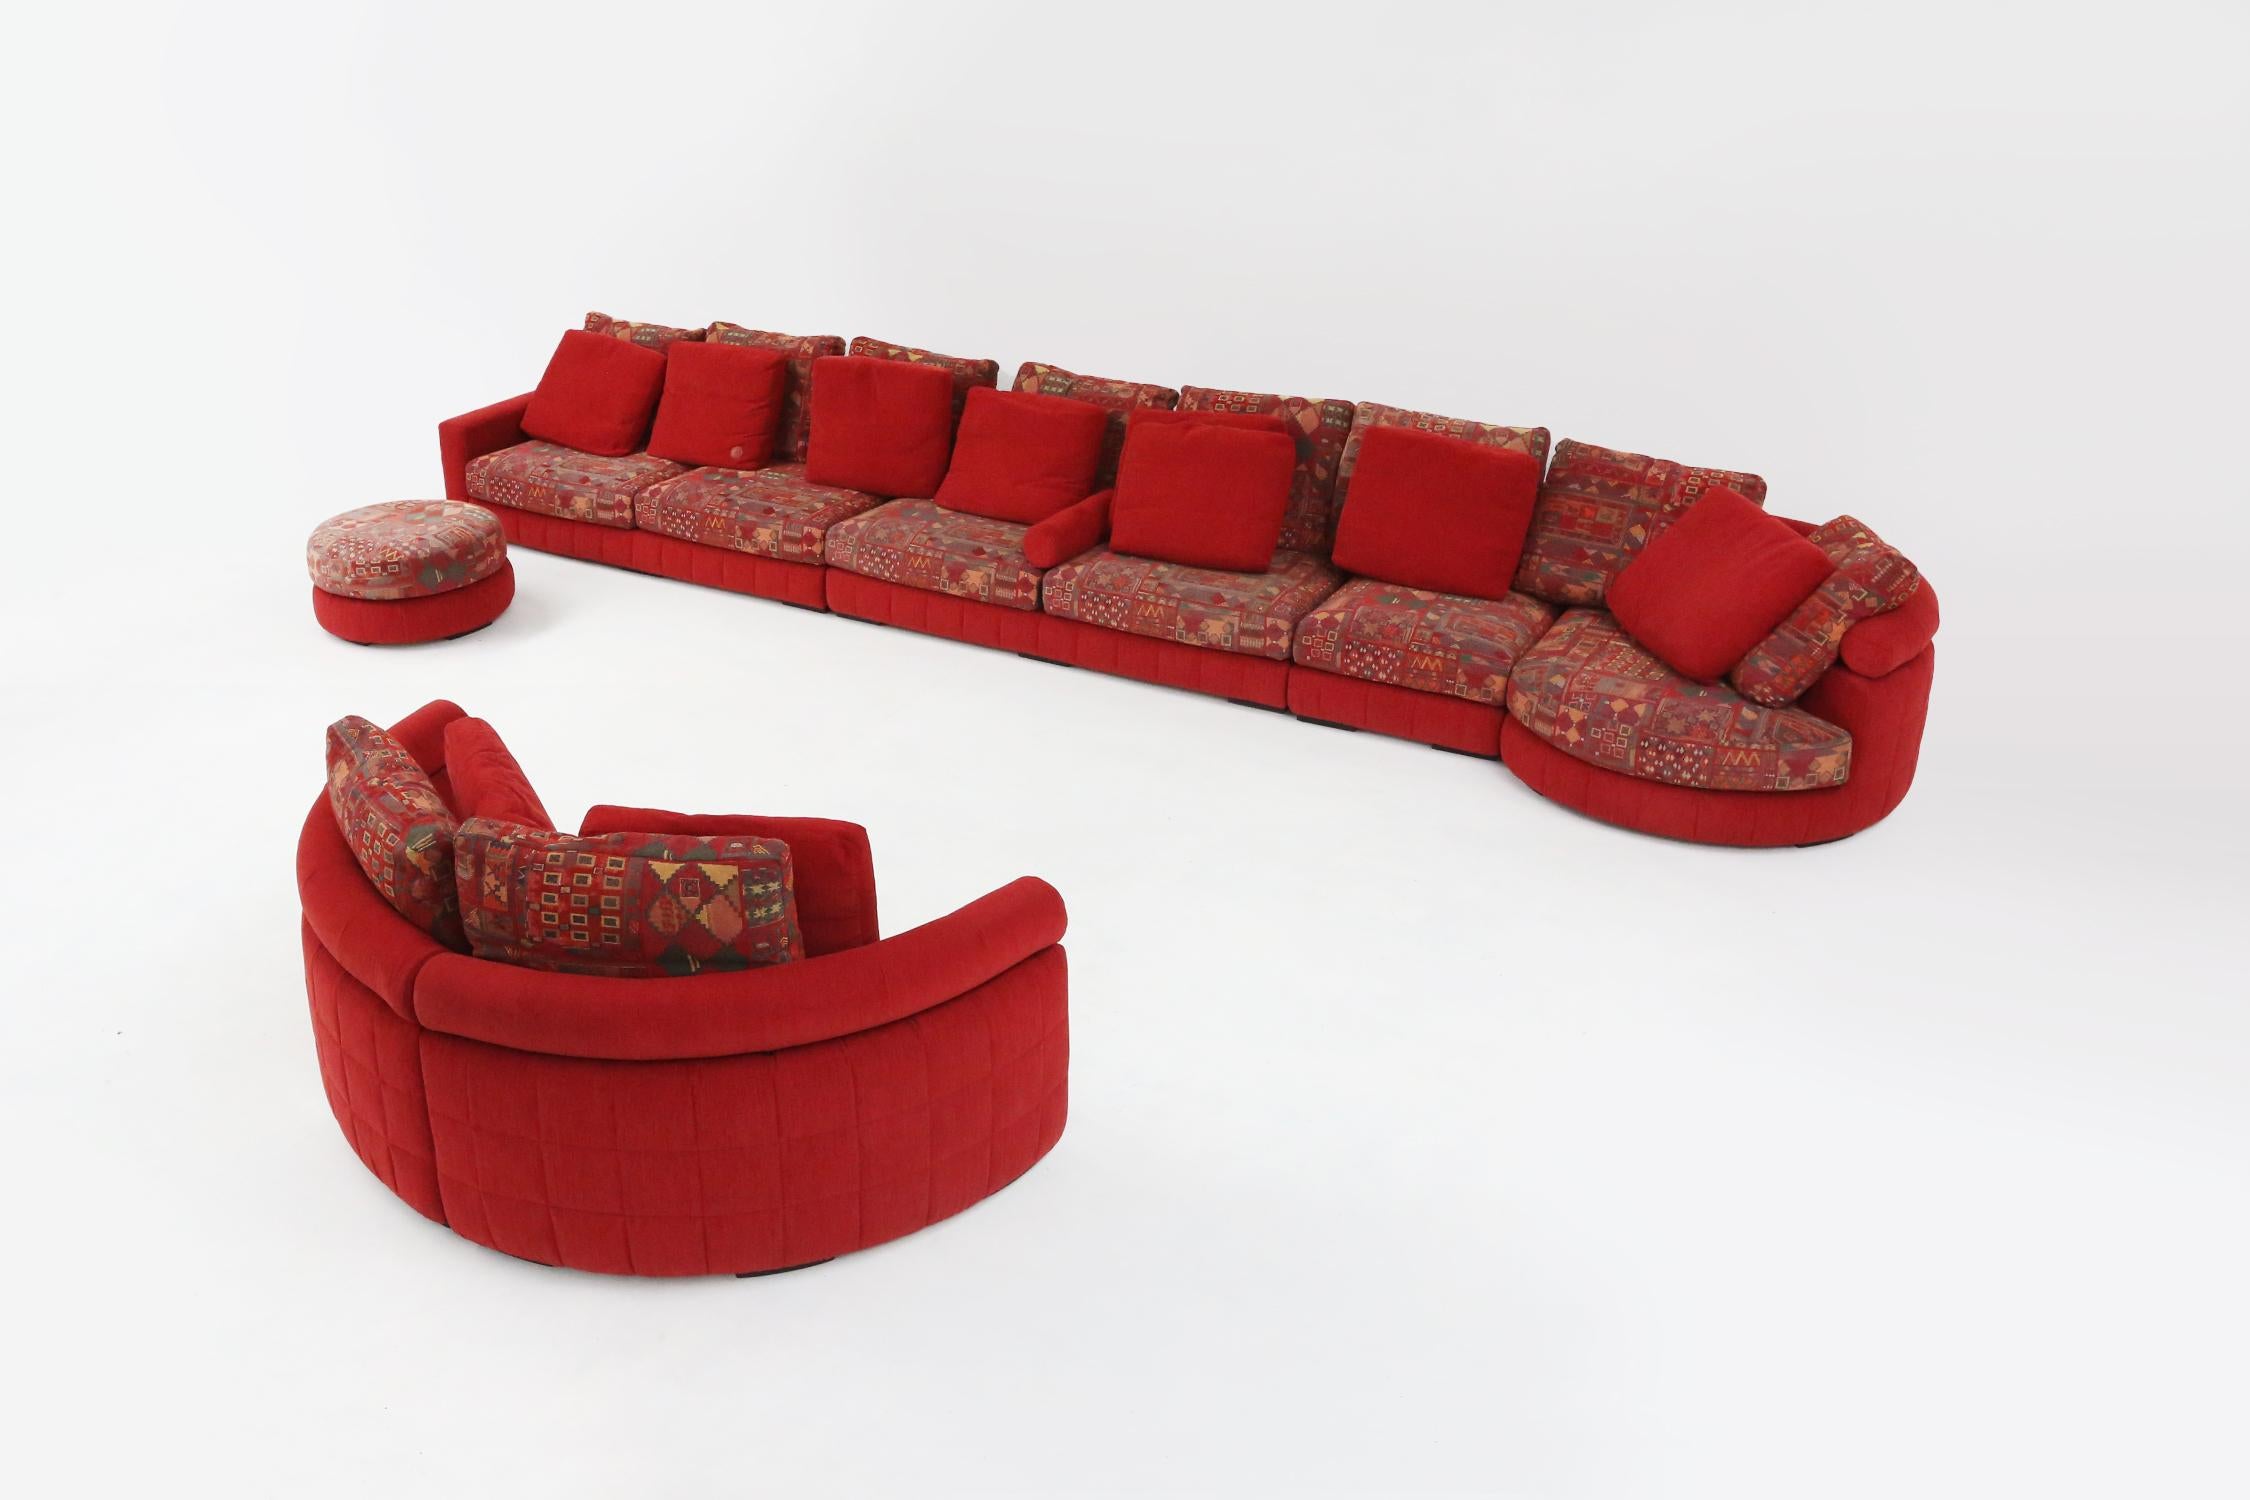 Mid-Century Modern Roche Bobois modular sofa in red and patterned upholstery 1980 For Sale